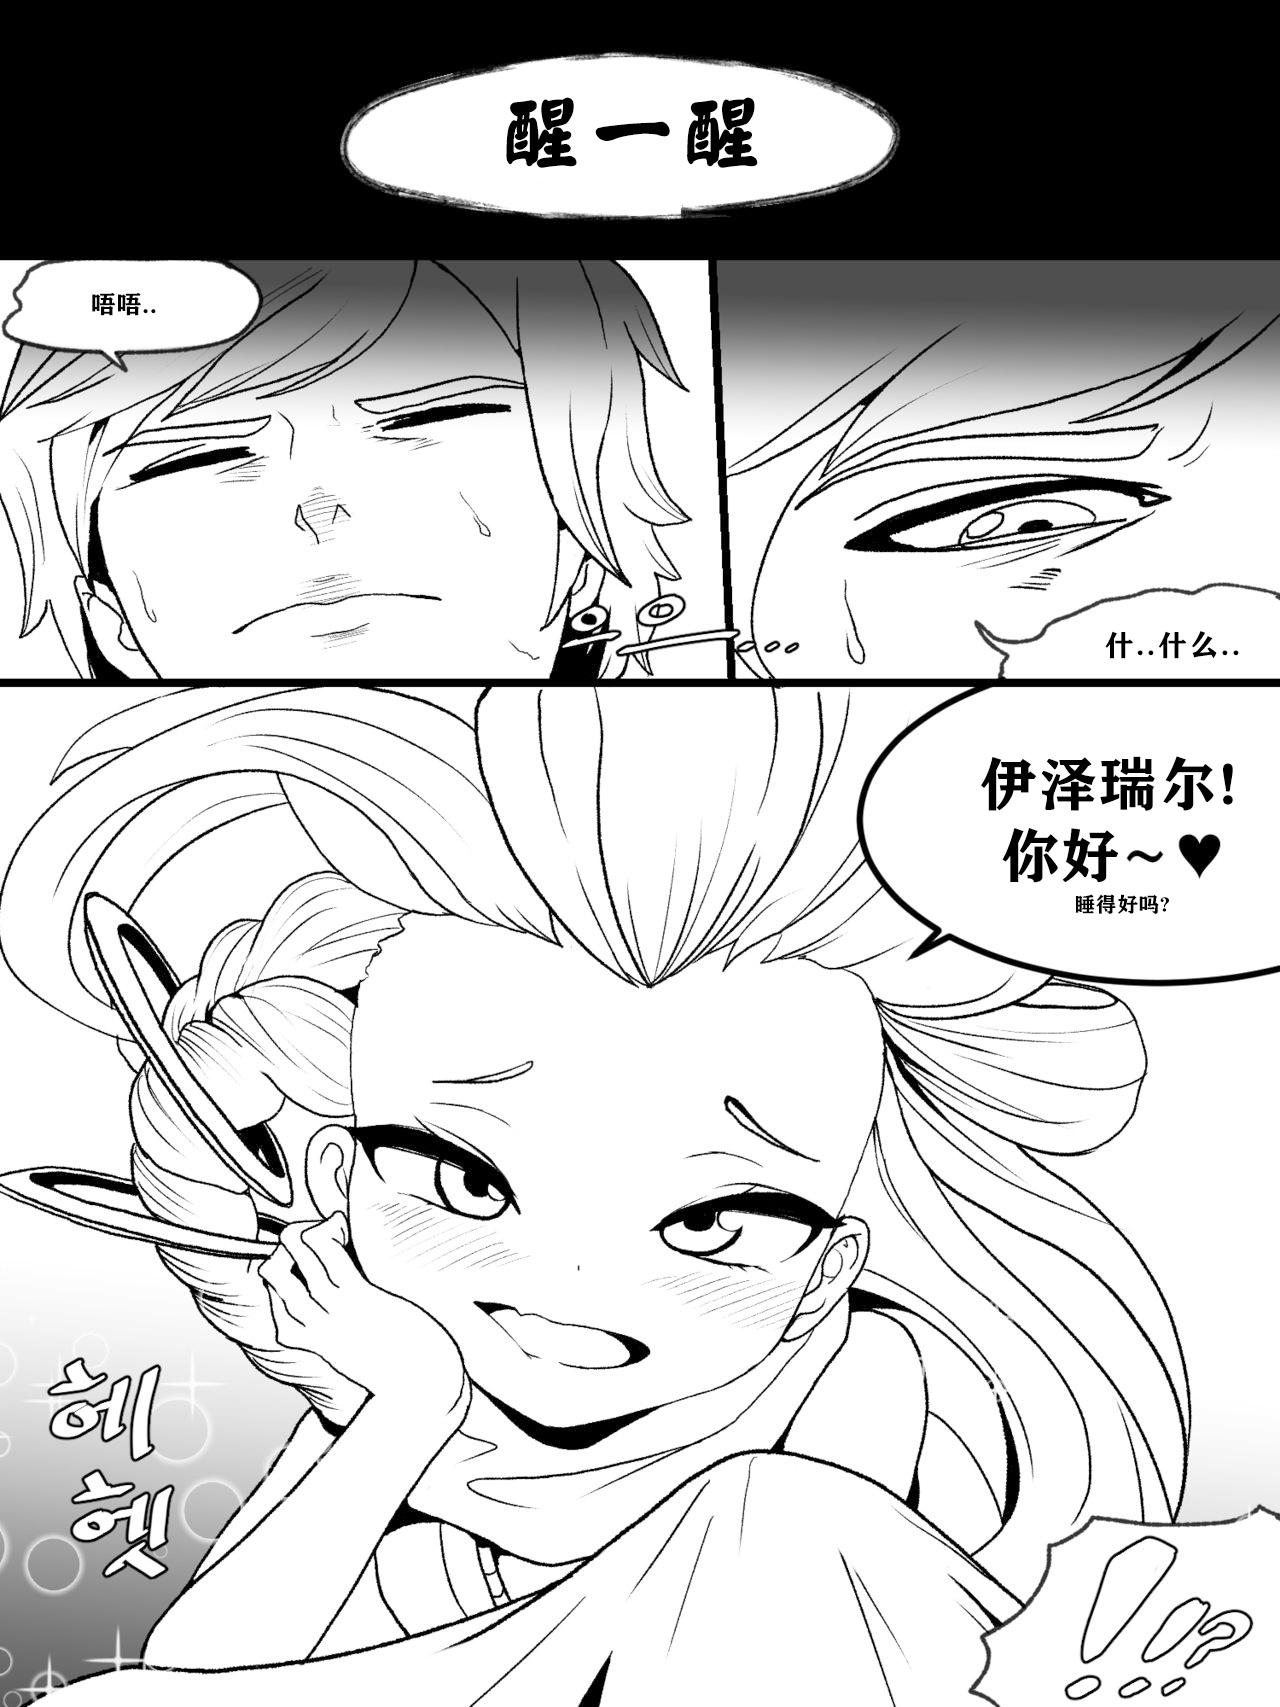 Dick Suck The reality in the starlight | 星光中的真实 - League of legends Redhead - Page 4